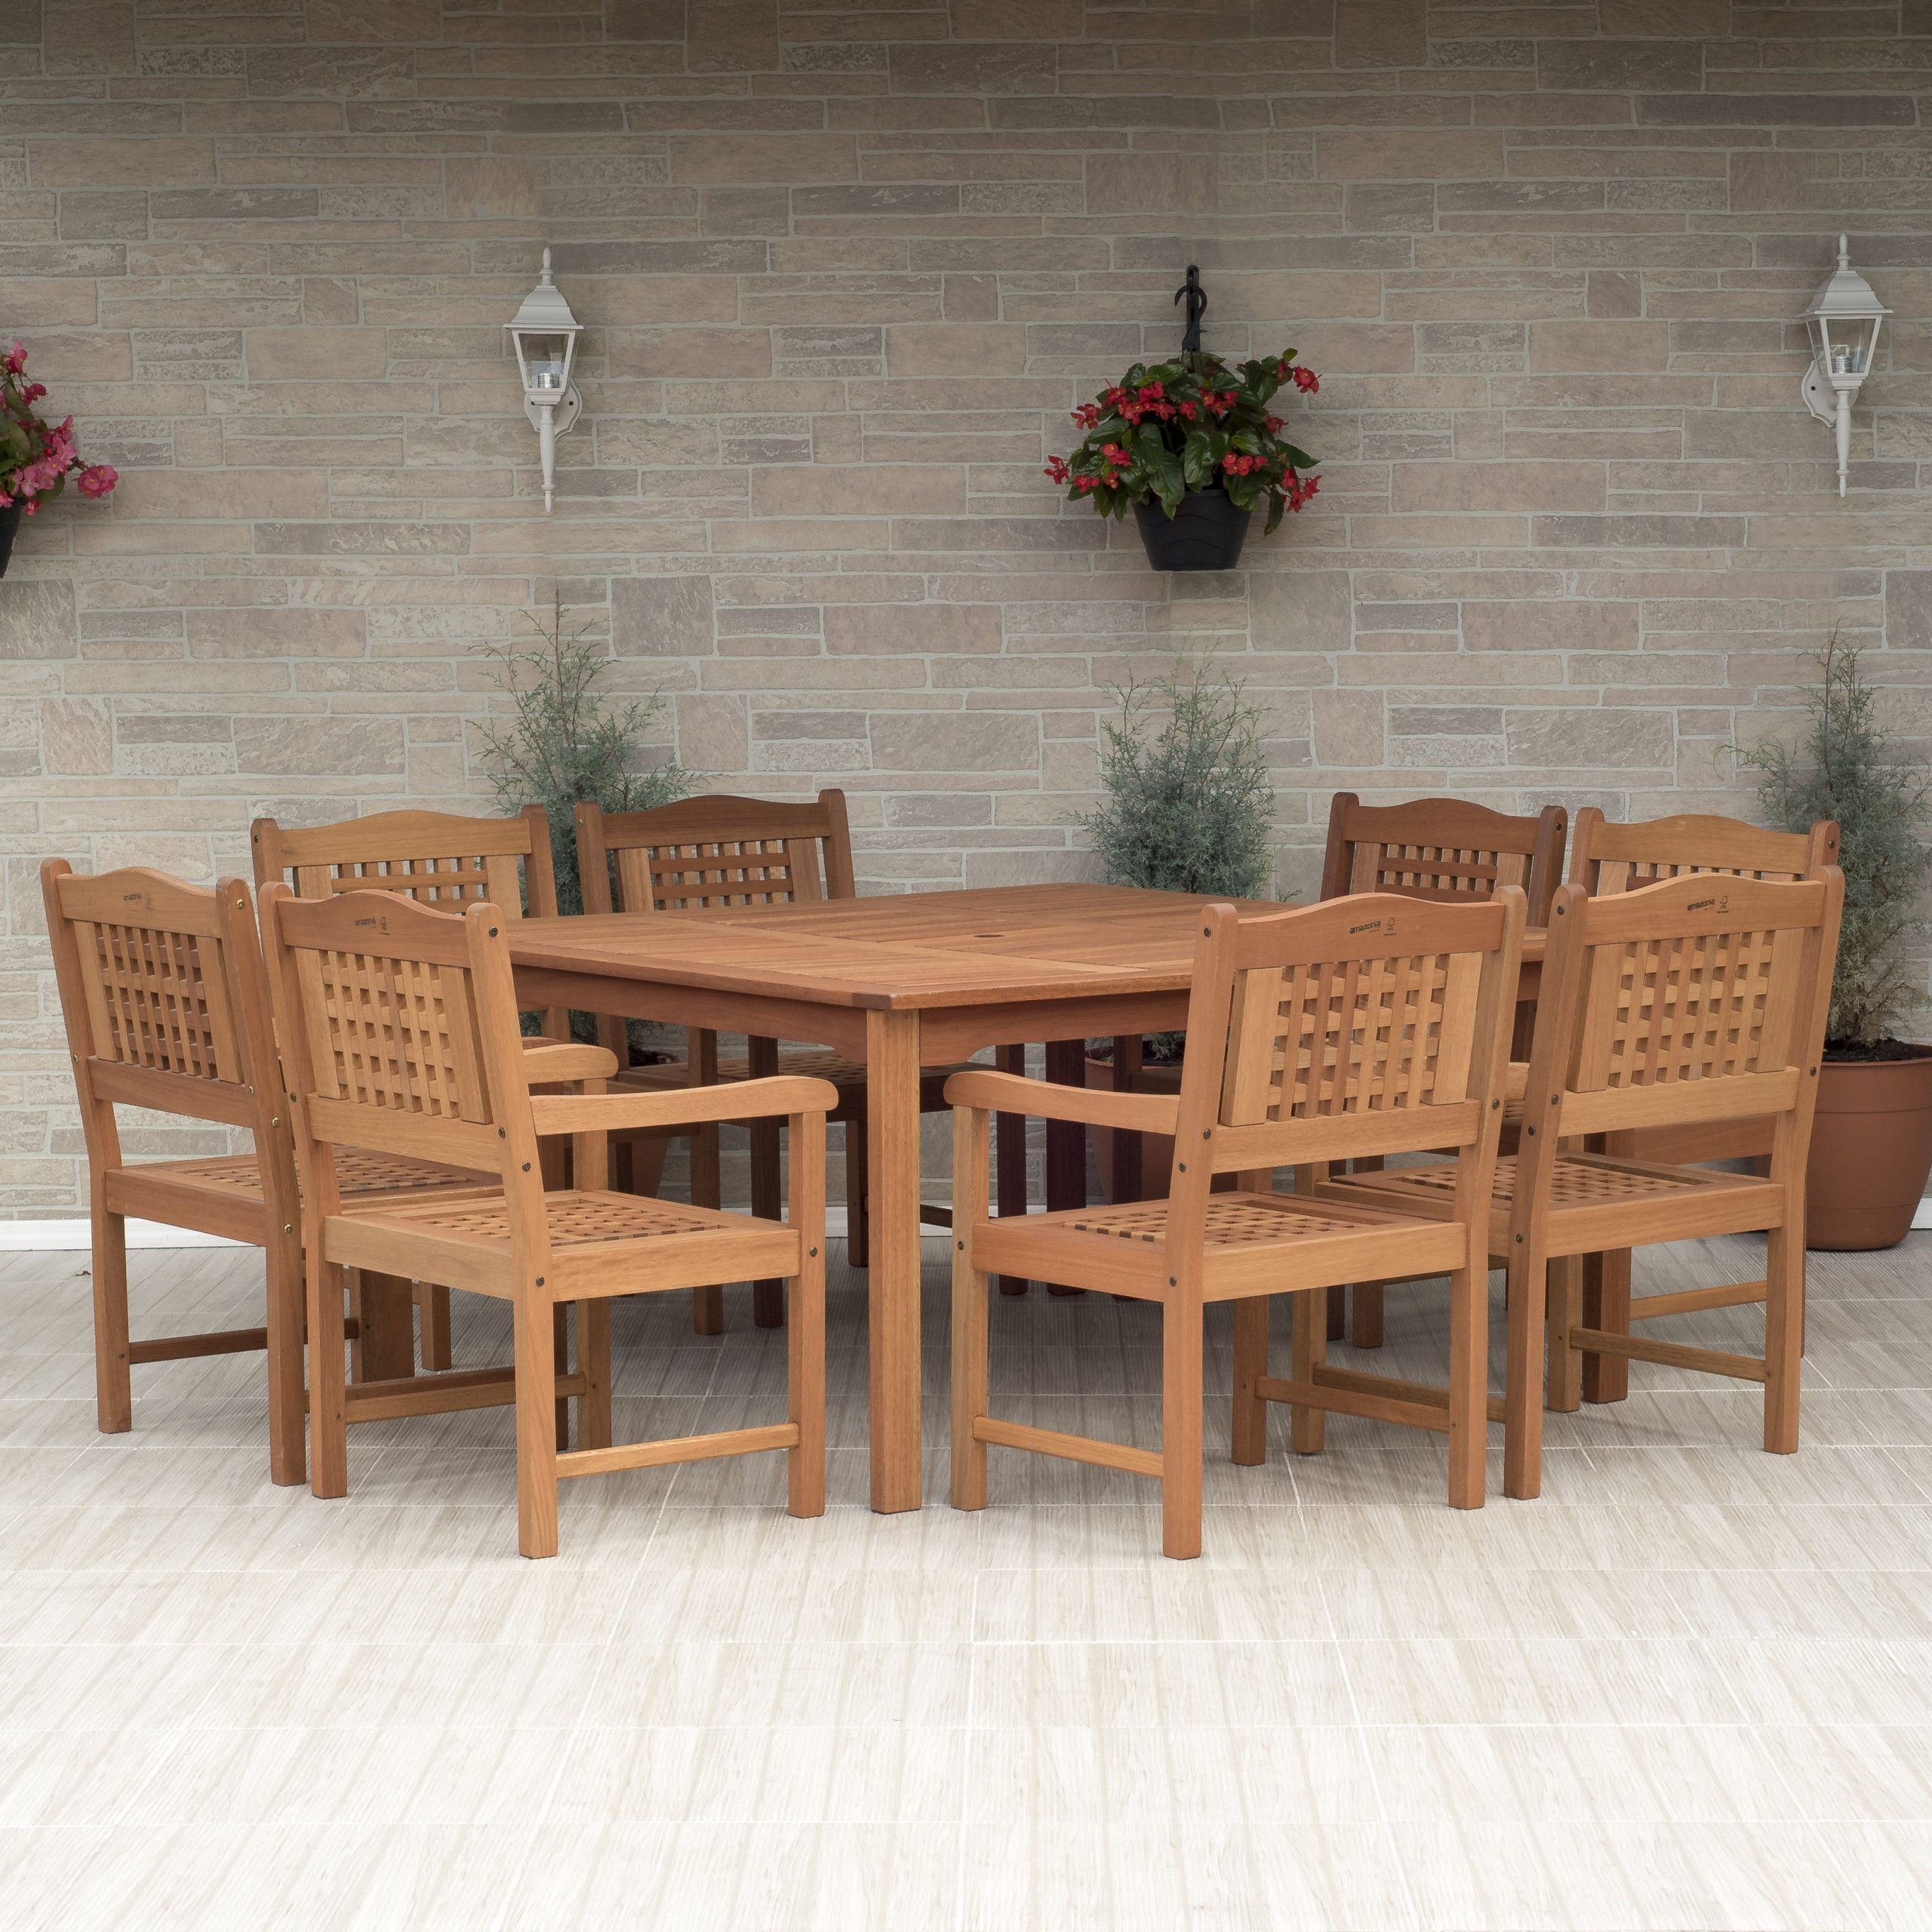 Amazonia Milano 9 Piece Square Patio Dining Set | Eucalyptus Wood With 9 Piece Teak Outdoor Square Dining Sets (View 7 of 15)